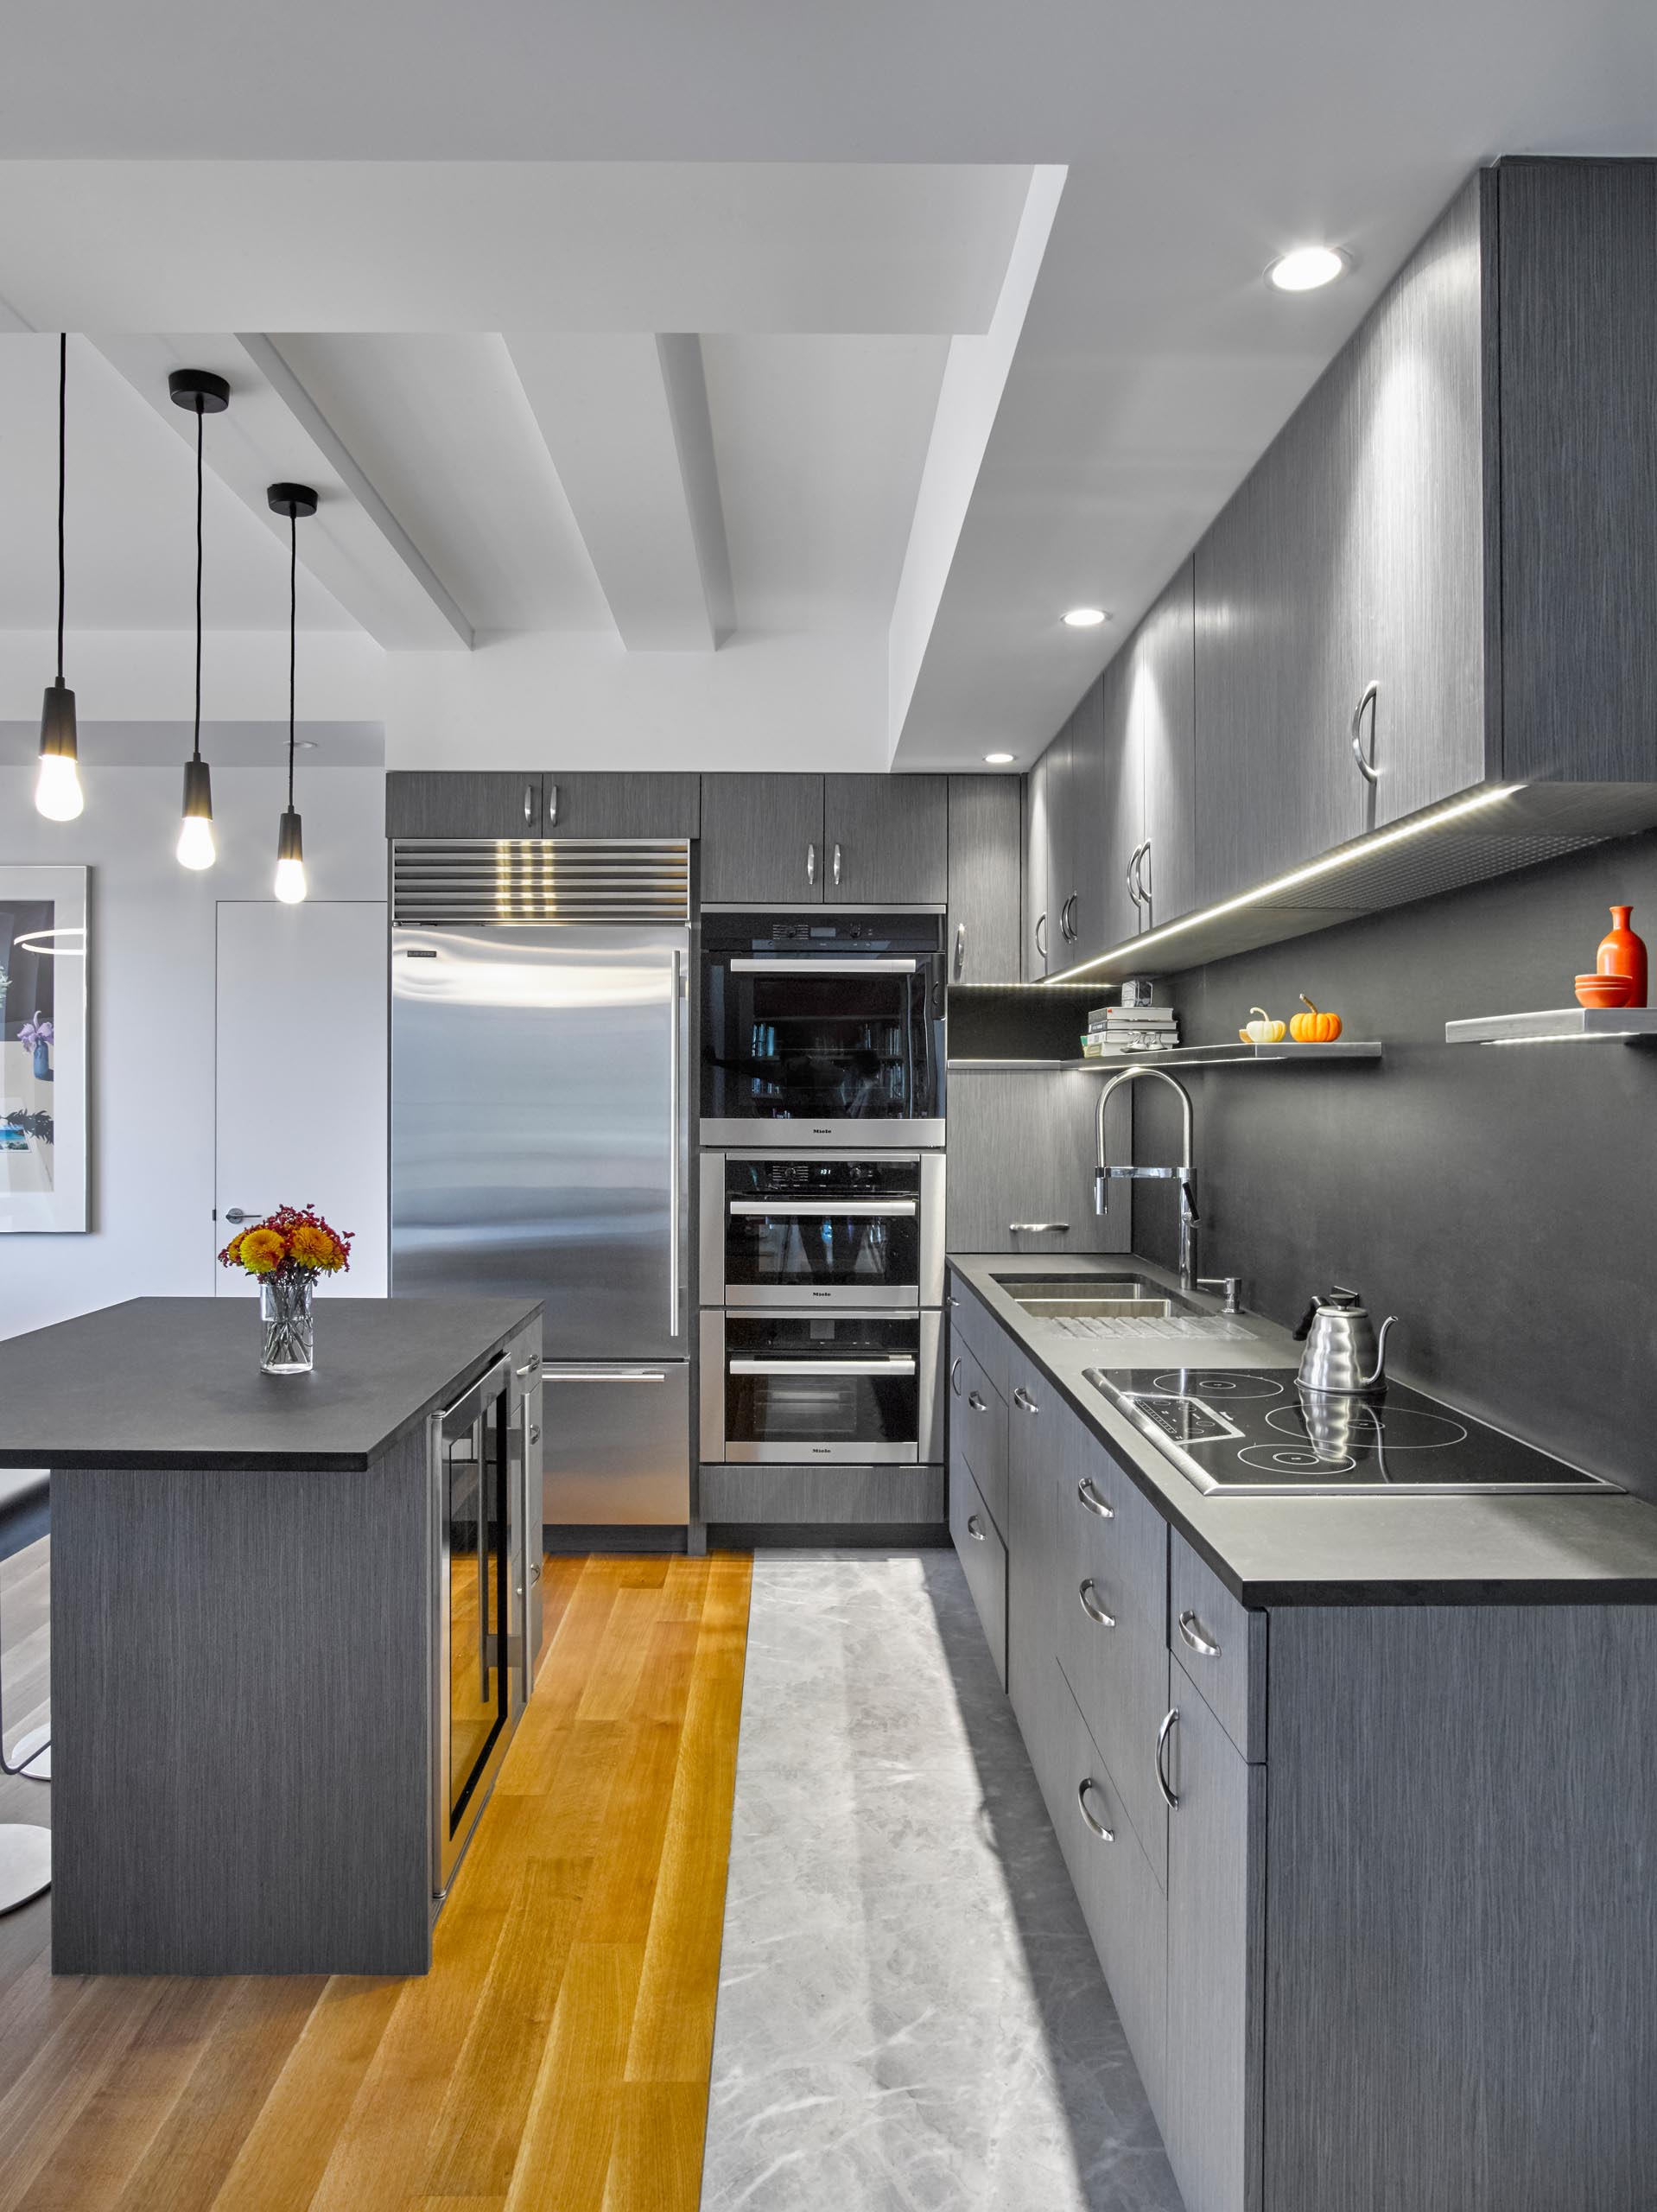 A modern kitchen with gray cabinets, LED undermount lighting, and Paperstone countertops and backsplash.